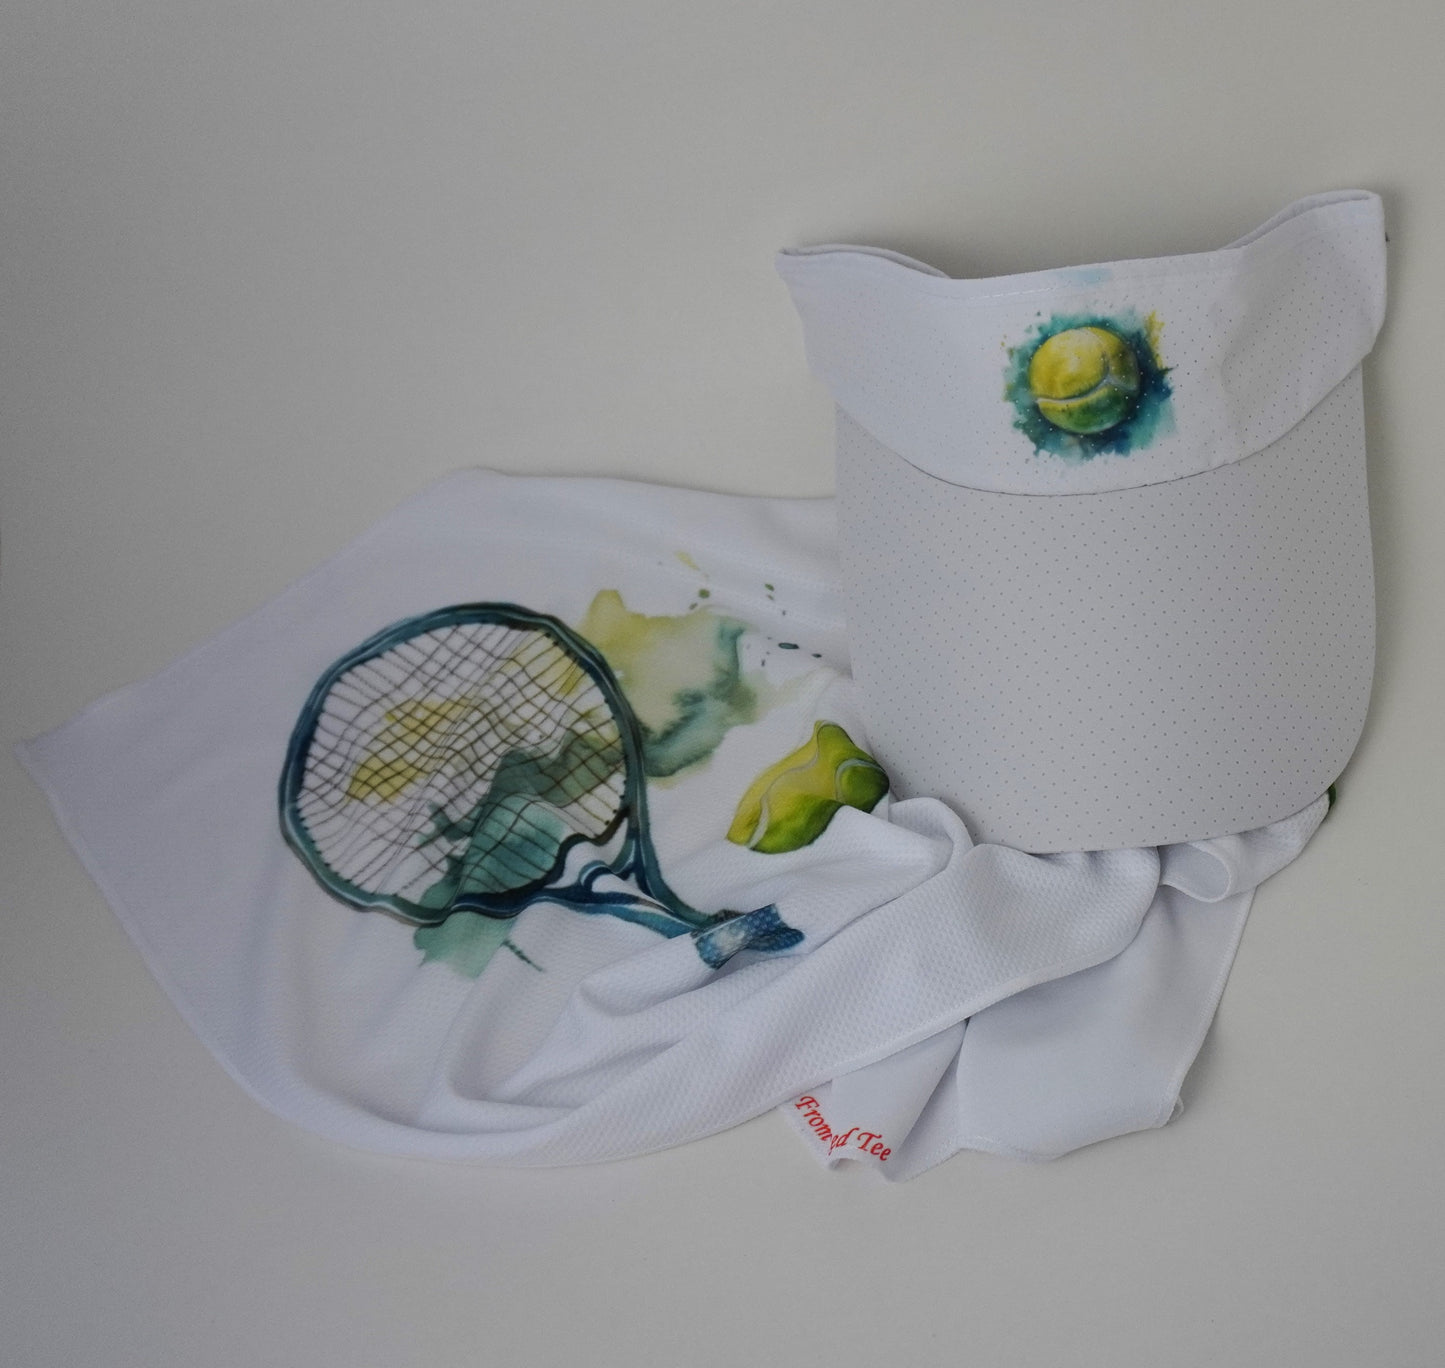 Tennis Cooling Towels